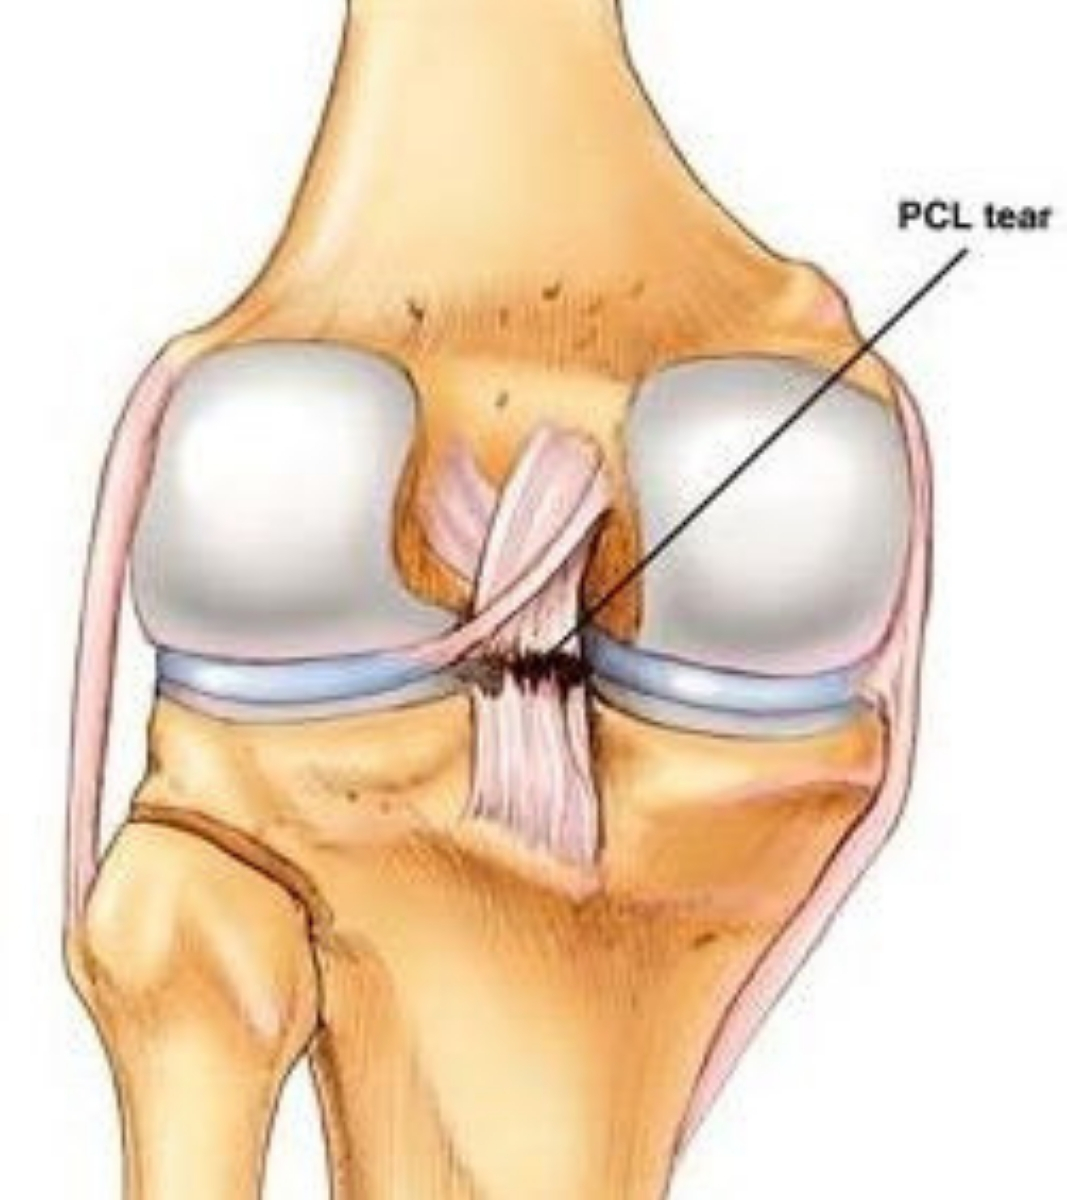 PCL, PCL treatment, PCL Surgery, PCL recovery, PCL tears, PCL managemnt, Knee doctors, Knee Specialist, Posterior Cruciate Ligament